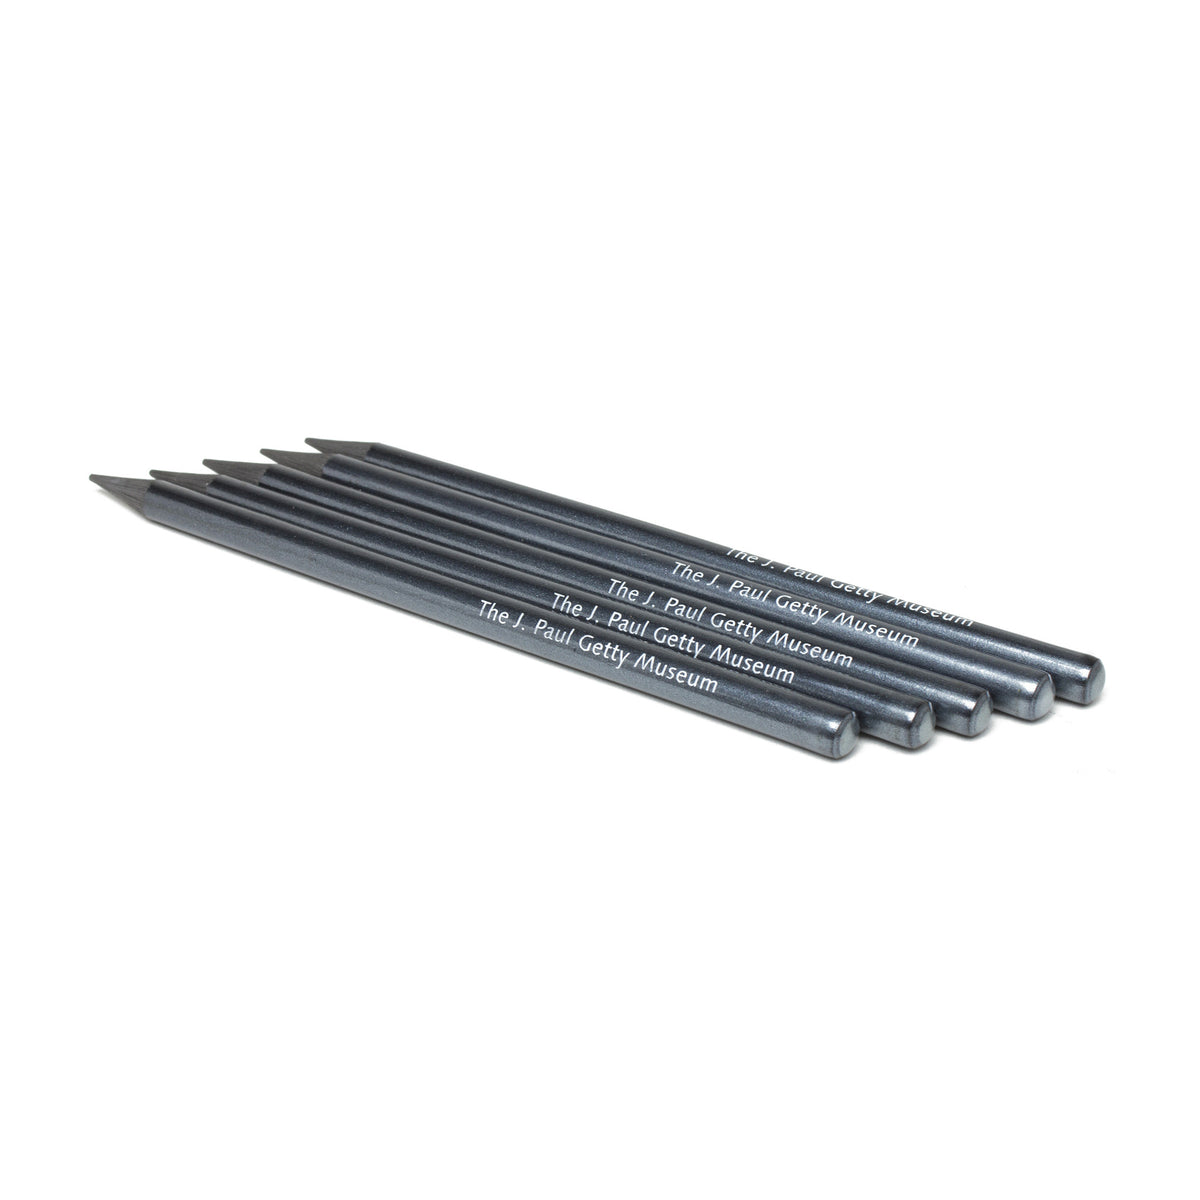 J. Paul Getty Museum Woodless Graphite Pencils | Getty Store